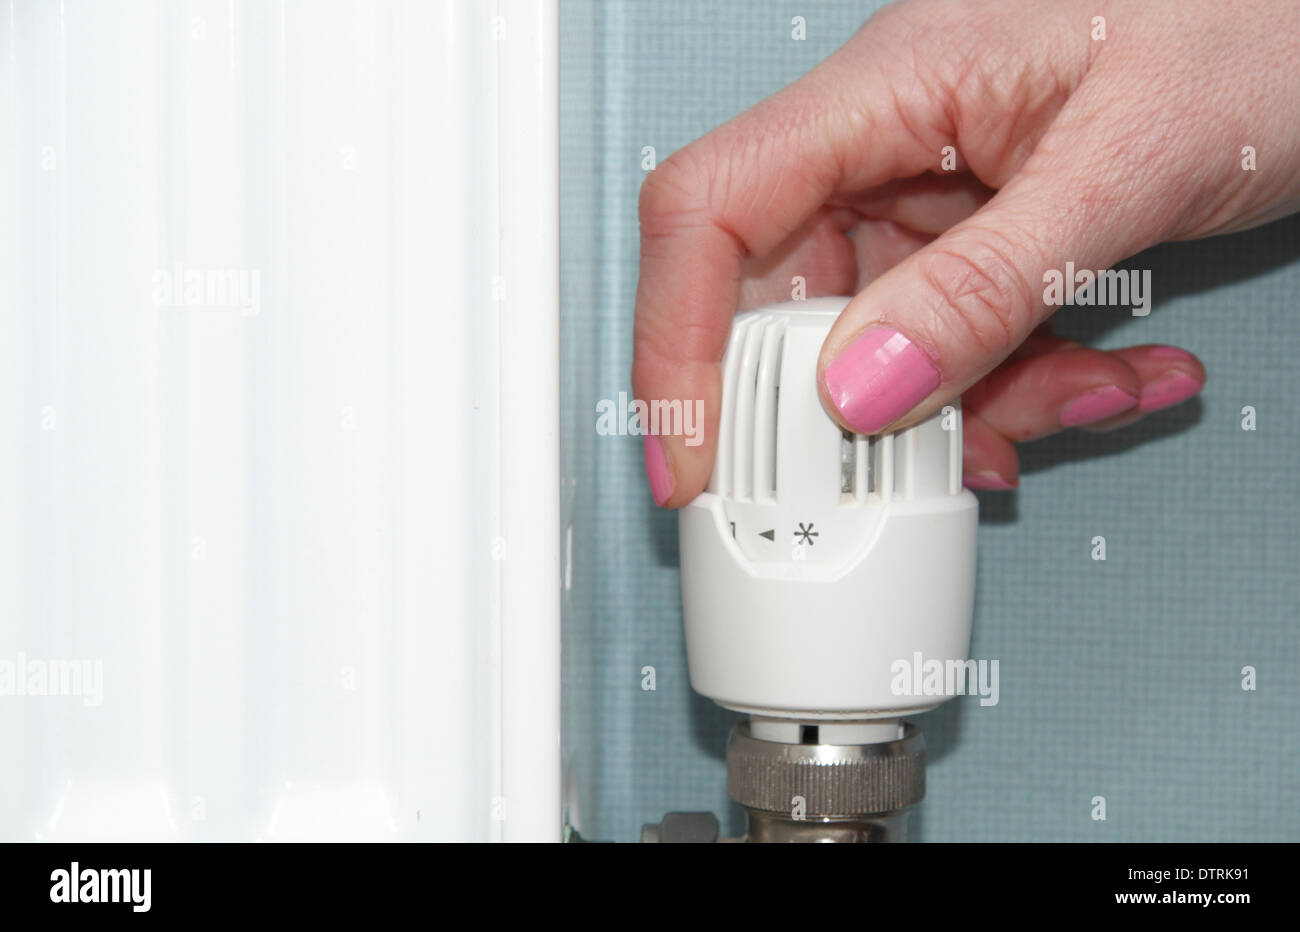 Woman turning thermostatic/radiator/ valve up/down on central heating system in domestic home, England, UK Stock Photo